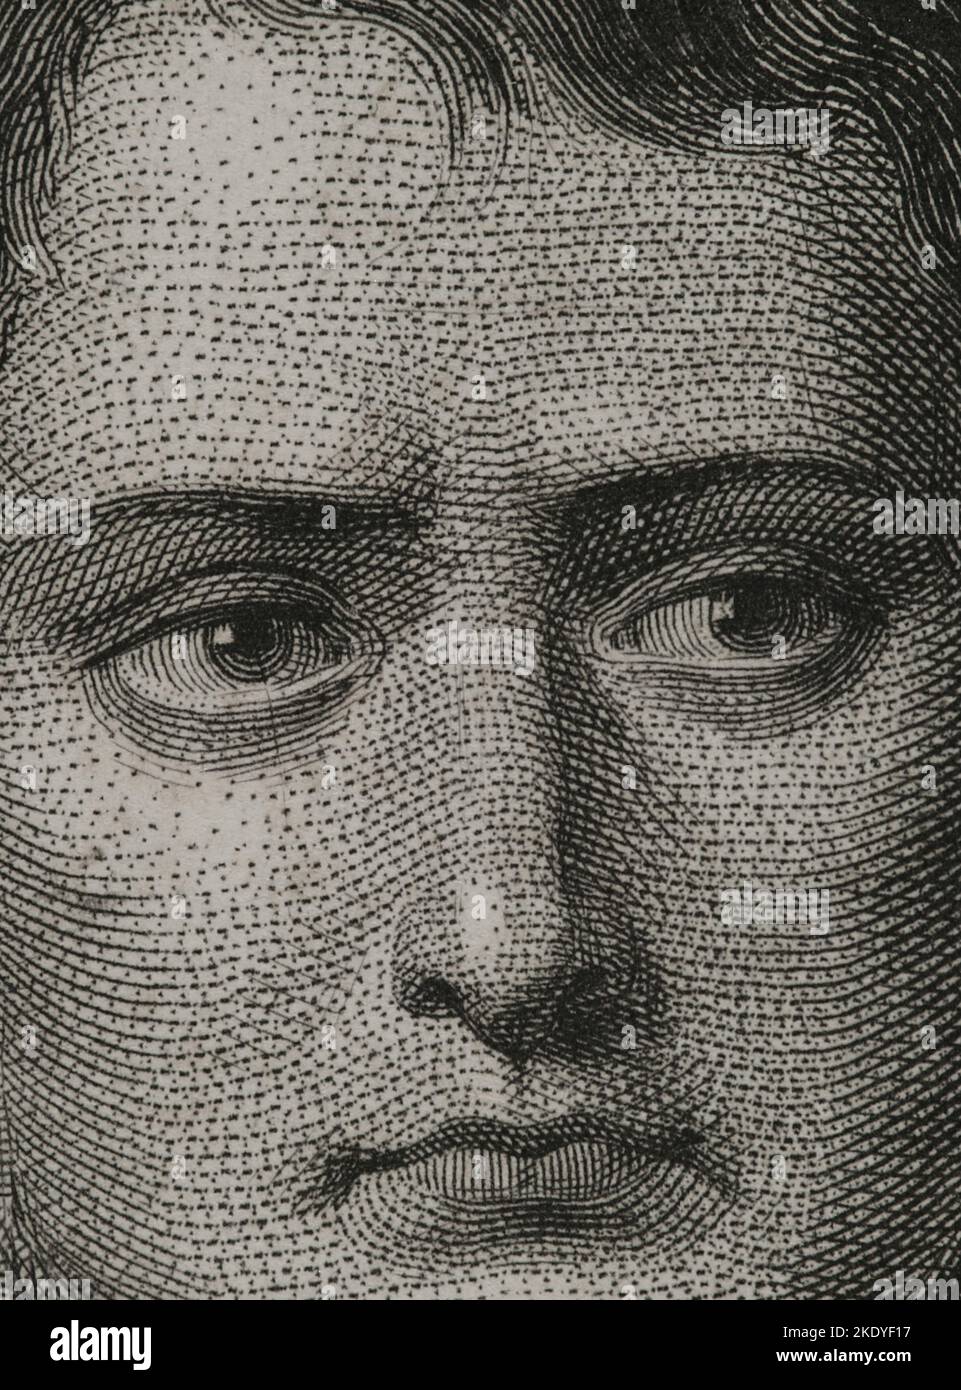 Napoleon Bonaparte (1769-1821). French military and political leader. As Napoleon I, he was Emperor of France (1804-1815). Portrait. Engraving by Geoffroy. Detail. 'Historia Universal', by César Cantú. Volume VI. 1857. Stock Photo